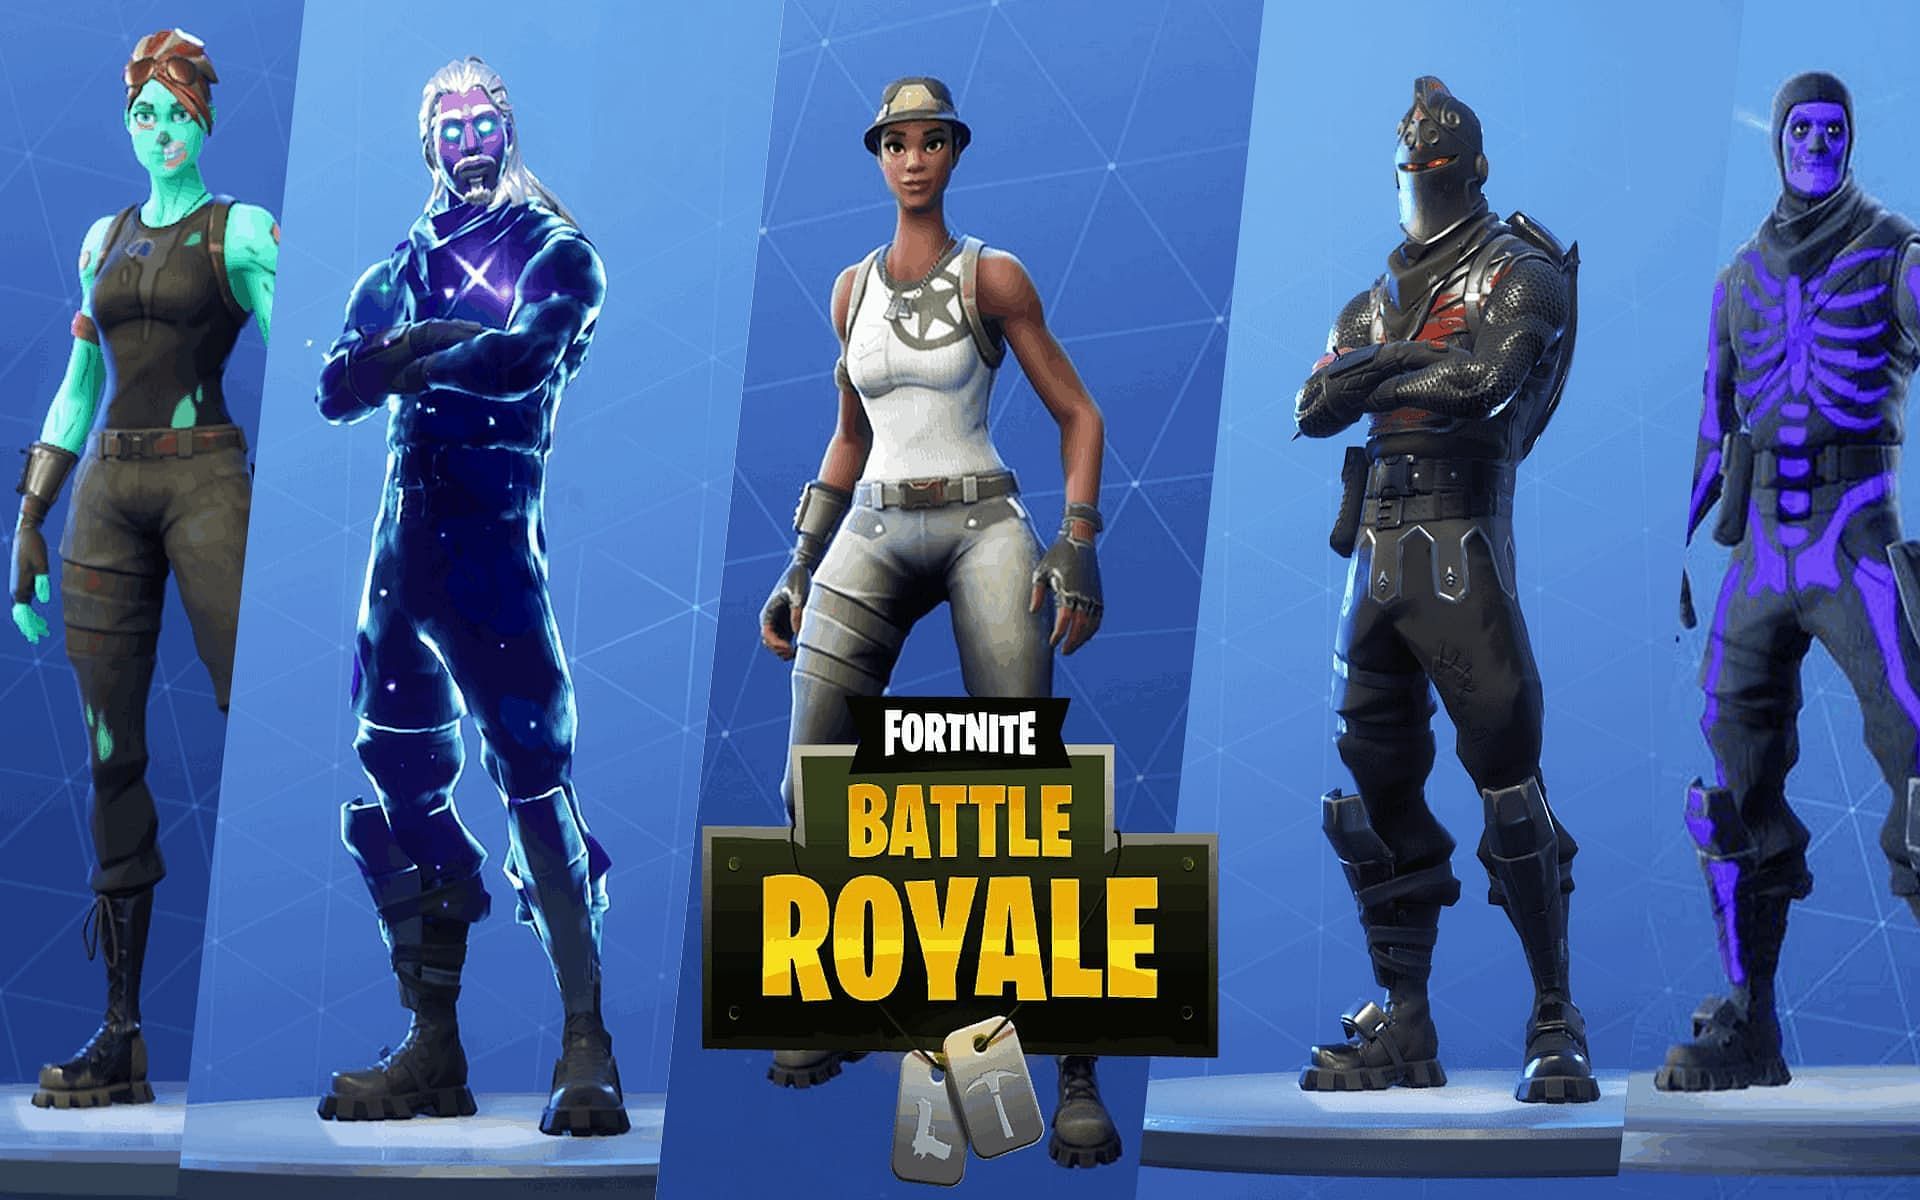 What Is the Rarest 'Fortnite' Skin? These Cosmetics Are the Most Valuable